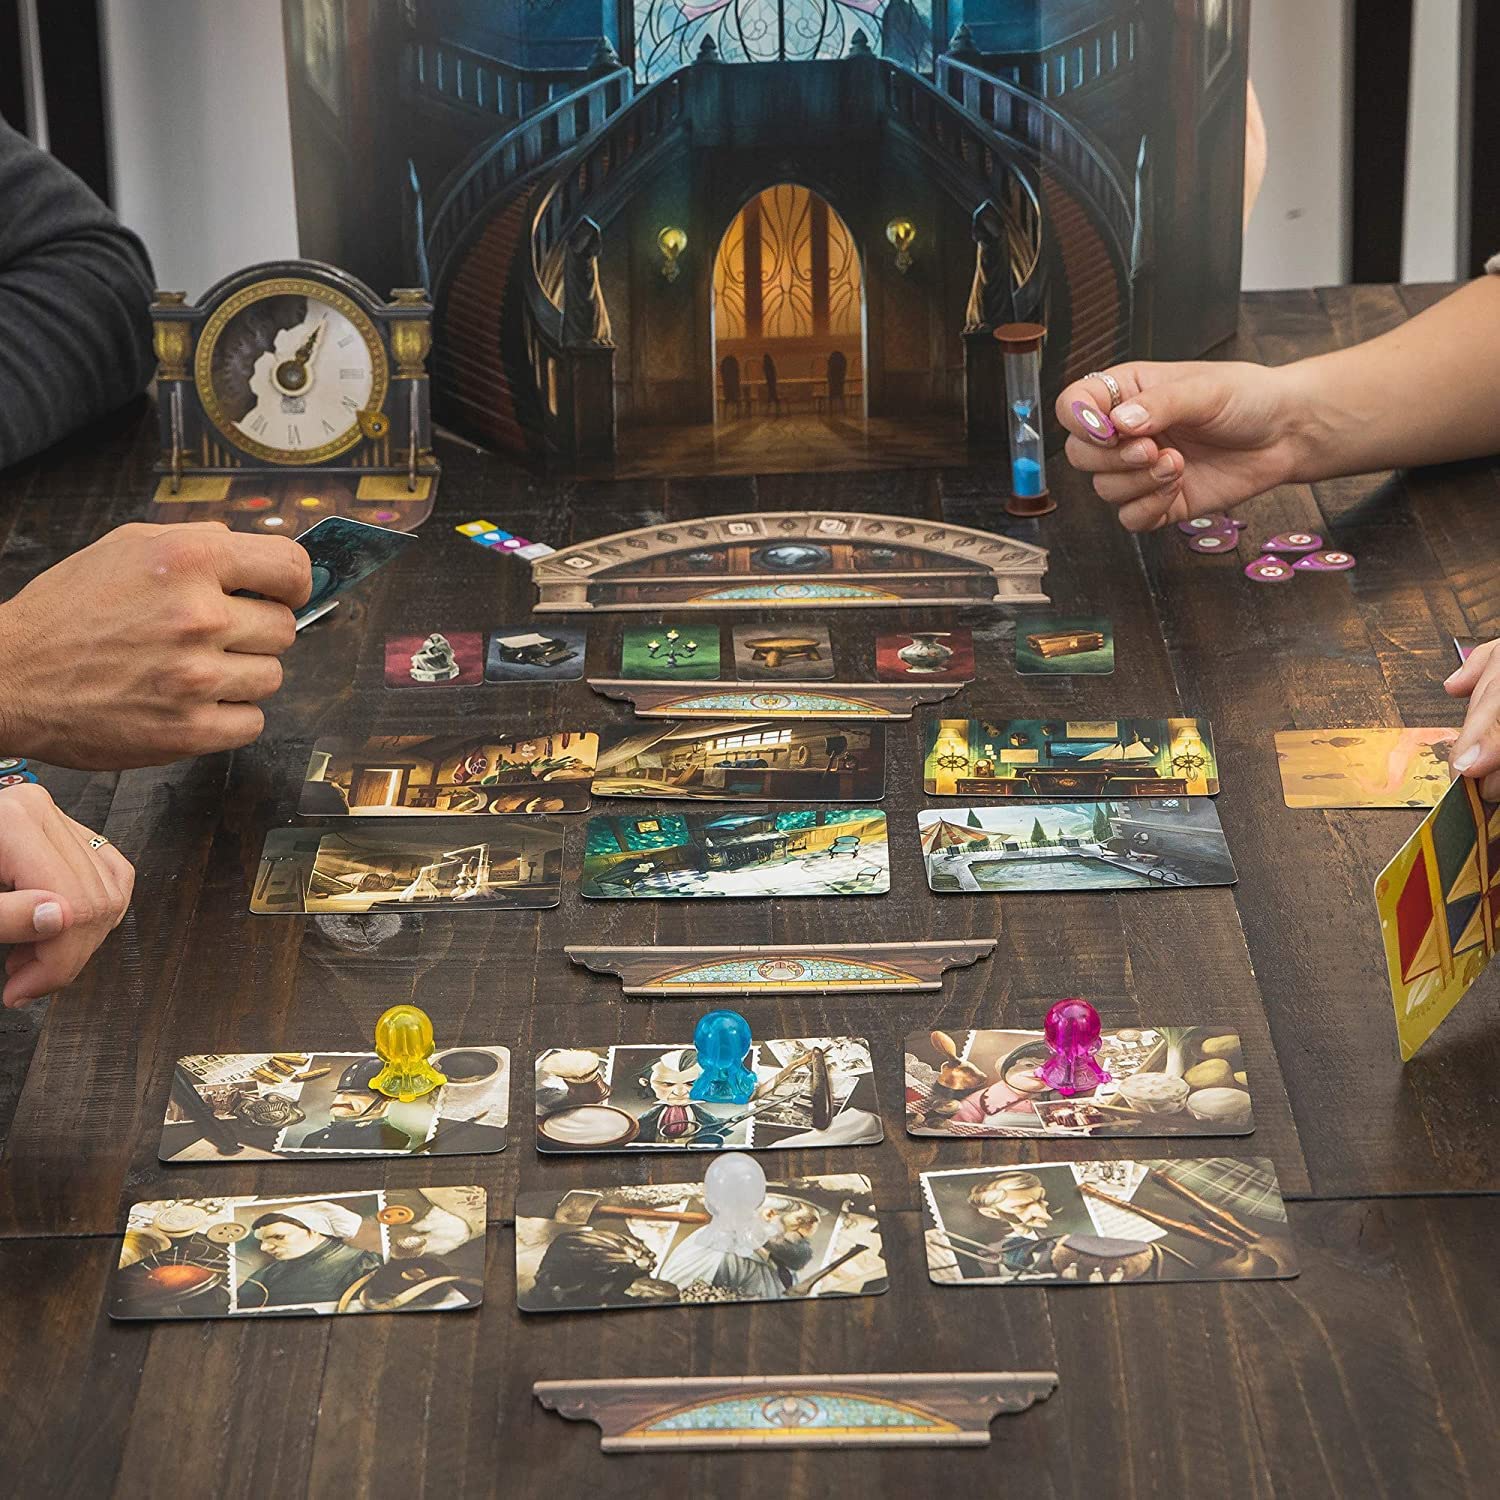 Mysterium Board Game (Base Game) - Enigmatic Cooperative Mystery Game with Ghostly Intrigue, Fun for Family Game Night, Ages 10+, 2-7 Players, 45 Minute Playtime, Made by Libellud